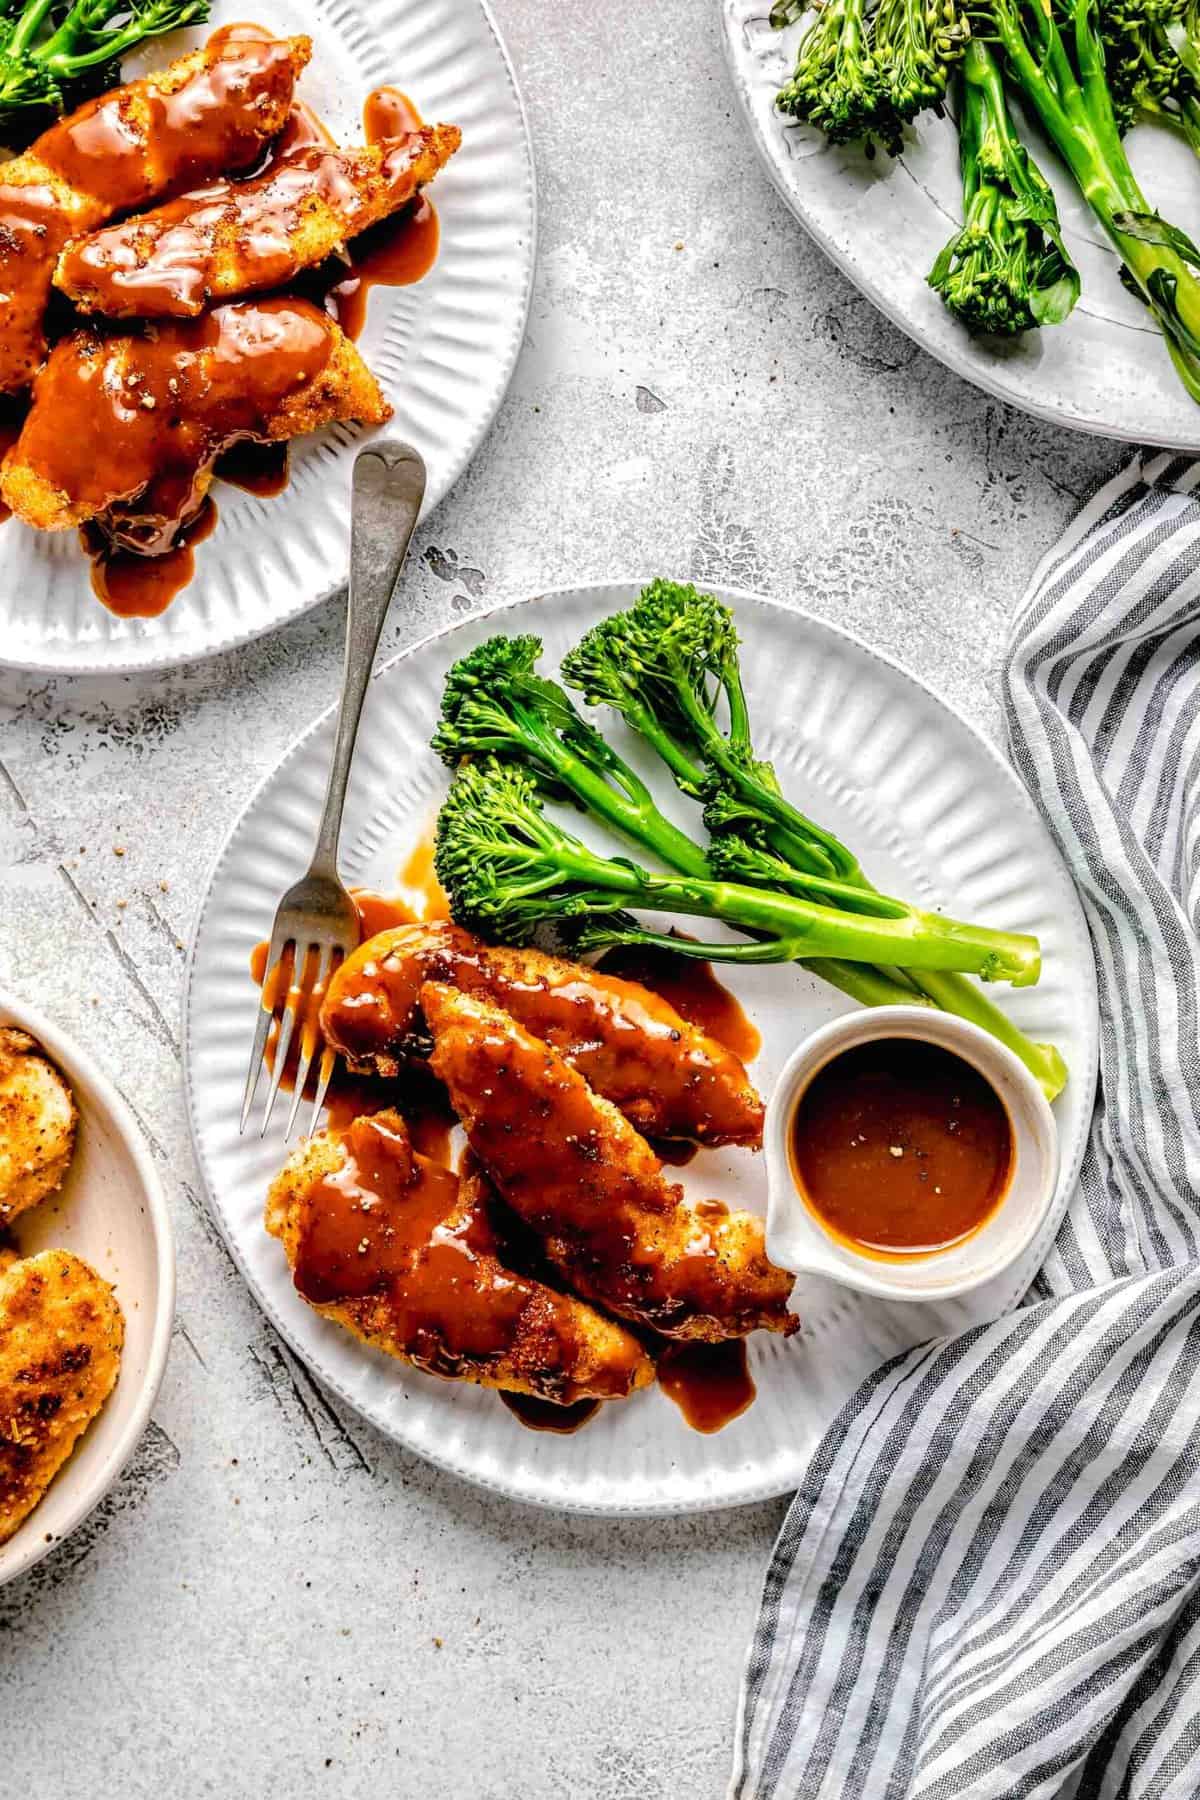 Bourbon chicken on a plate with broccoli, extra sauce, and a fork.